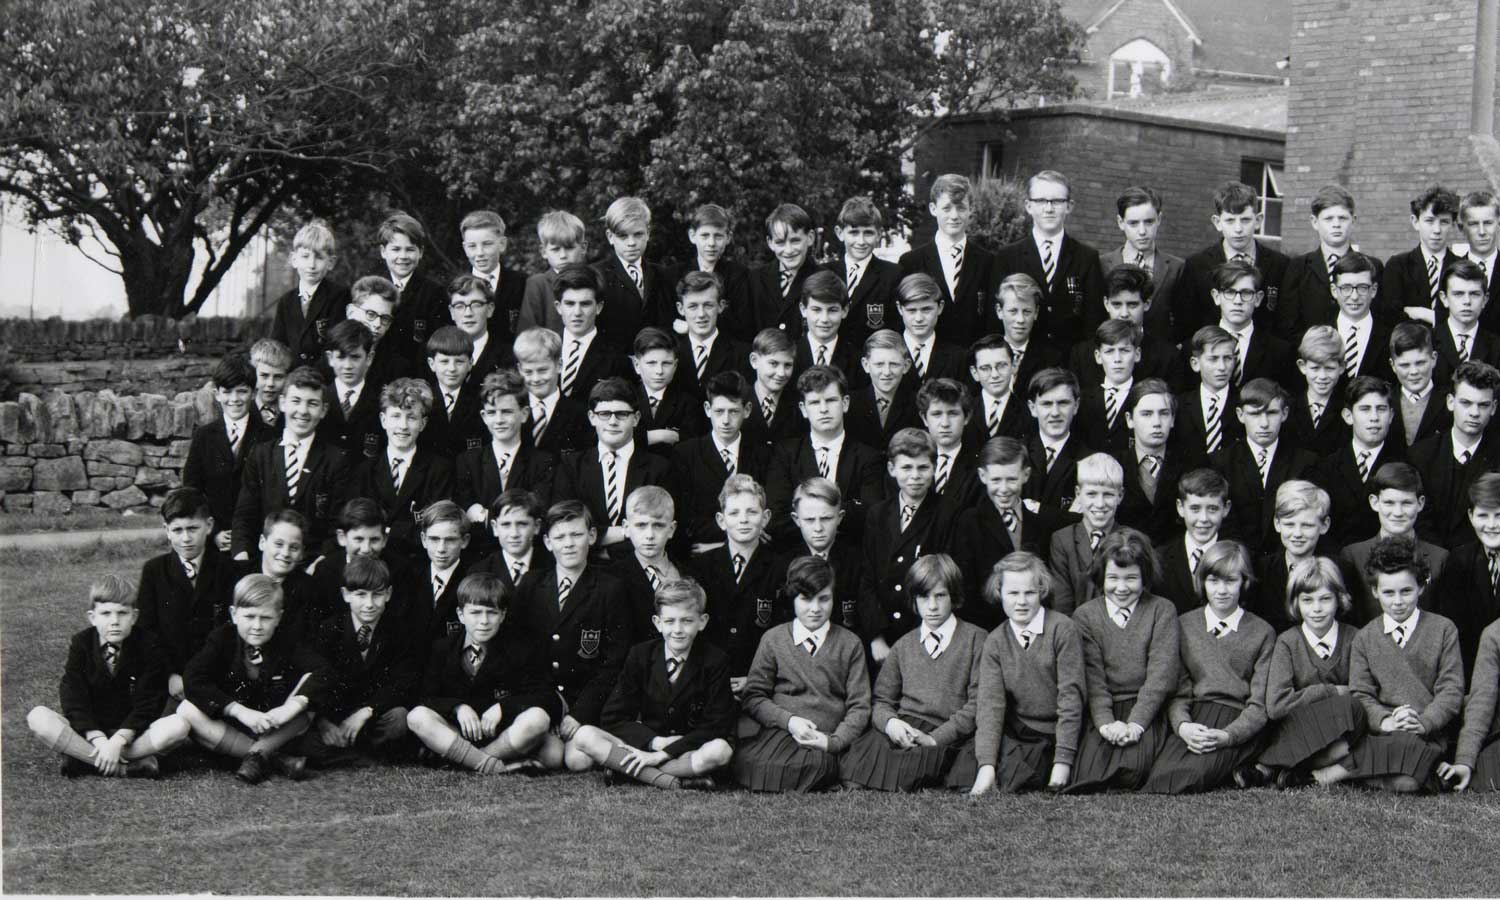 A photo of section1 of the Bells Grammar School photo from 1963 - section 1